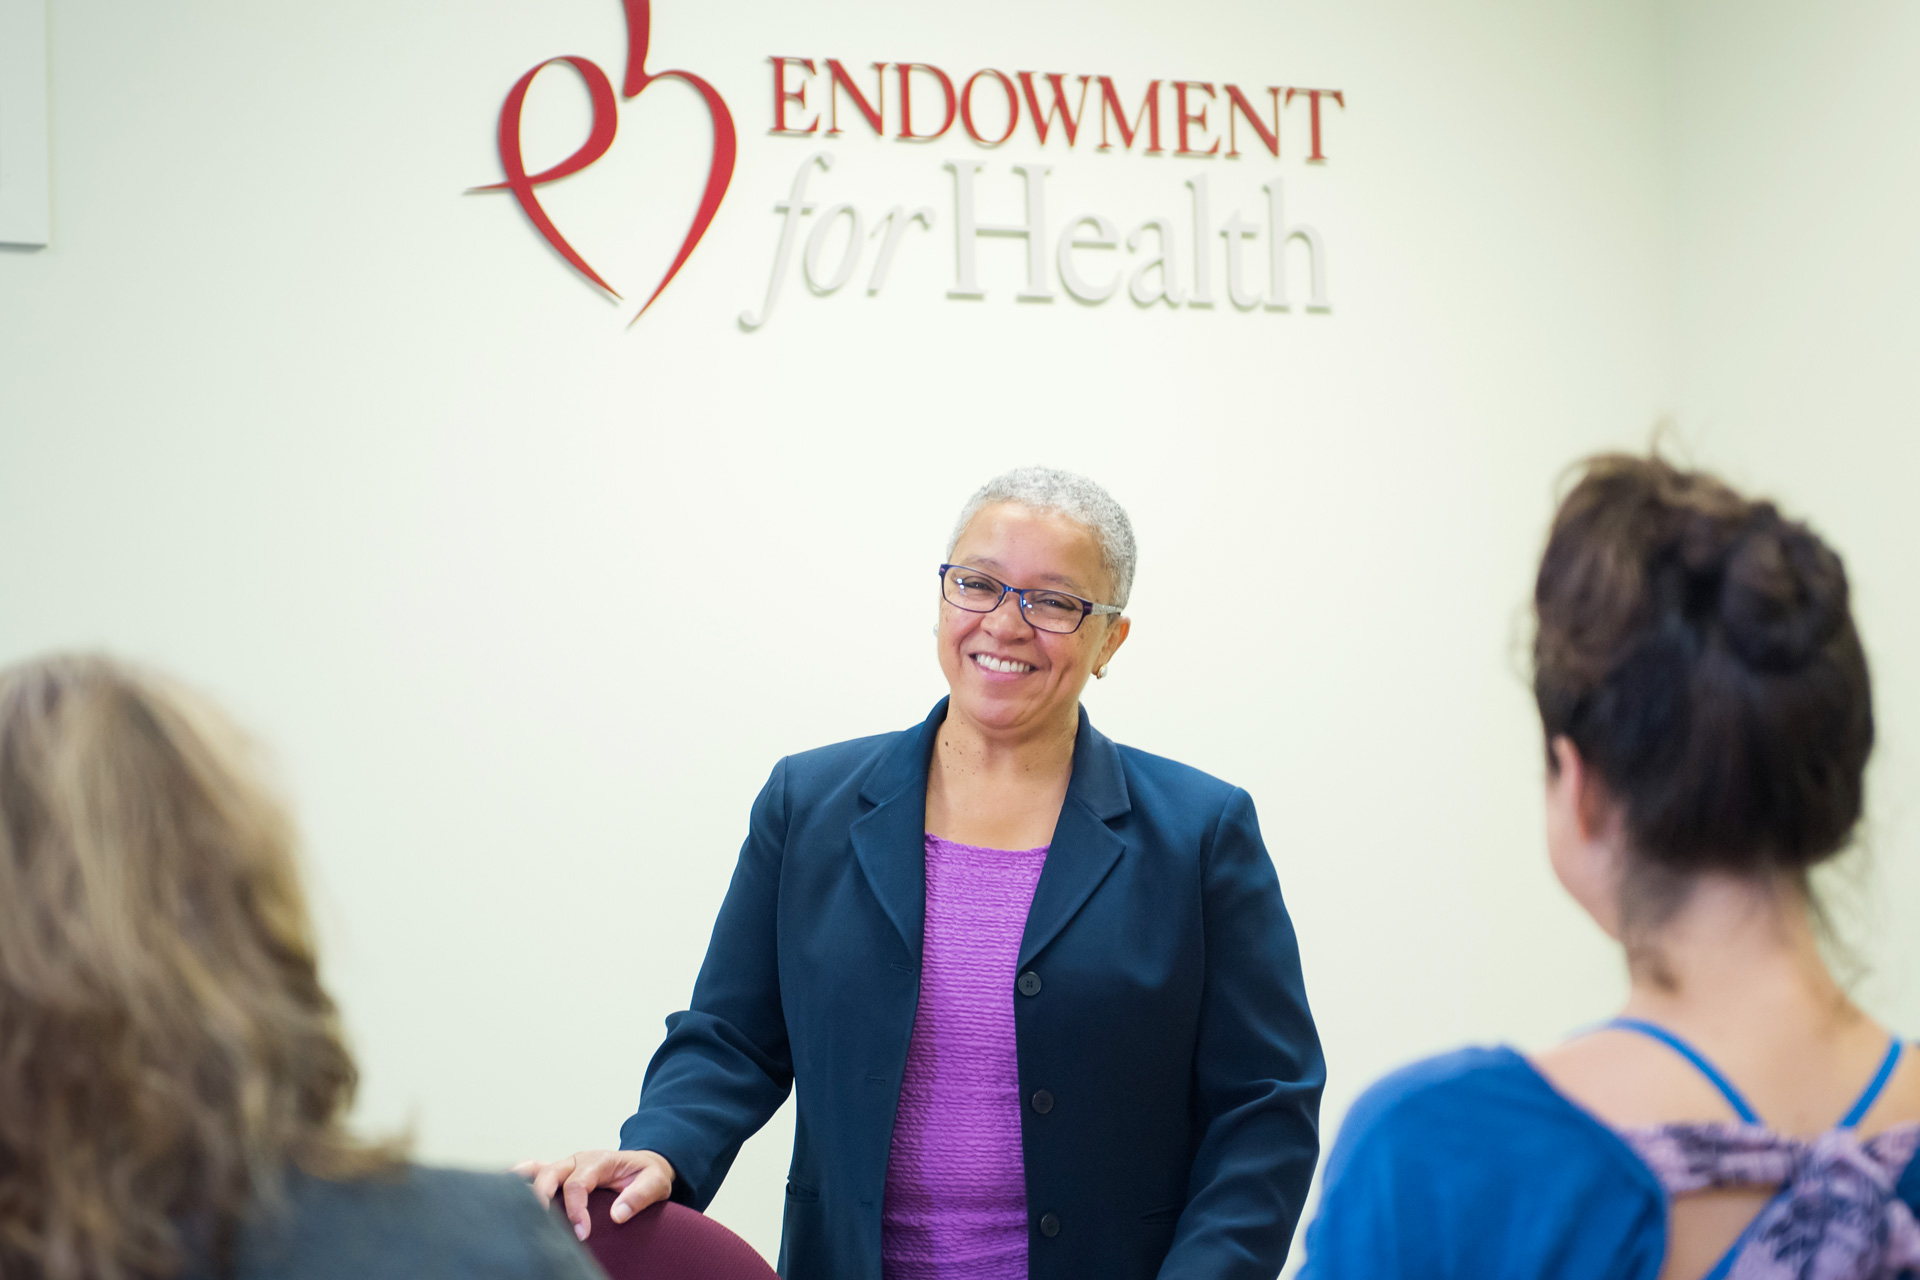 Woman speaks to visitors with Endowment for Health logo behind her